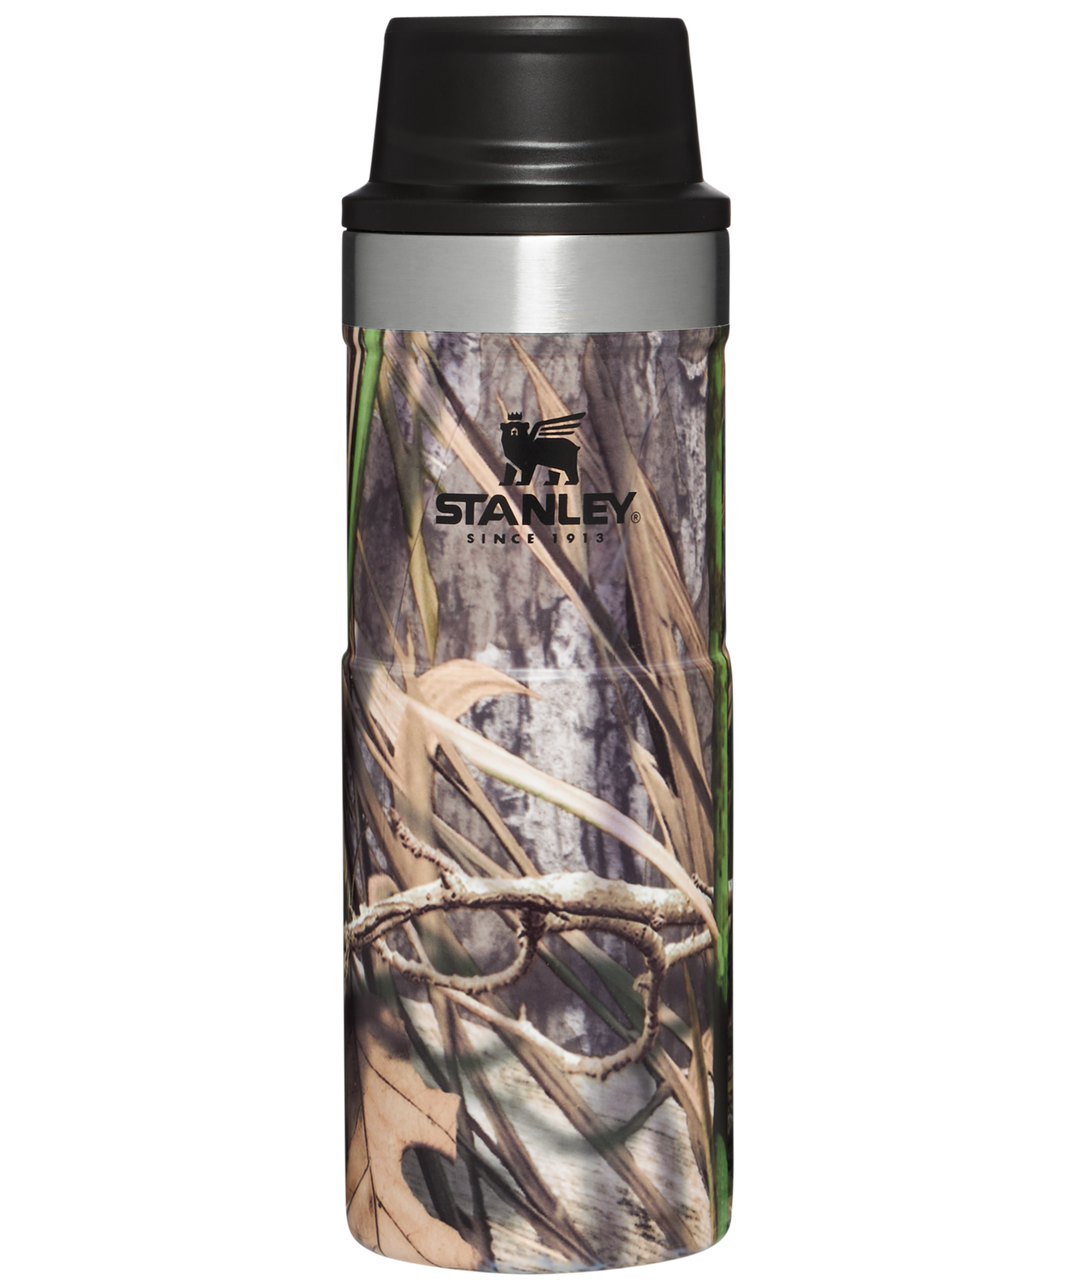 Stanley The Trigger-Action Travel Mug 470 ml, Country DNA Mossy Oak Thermos